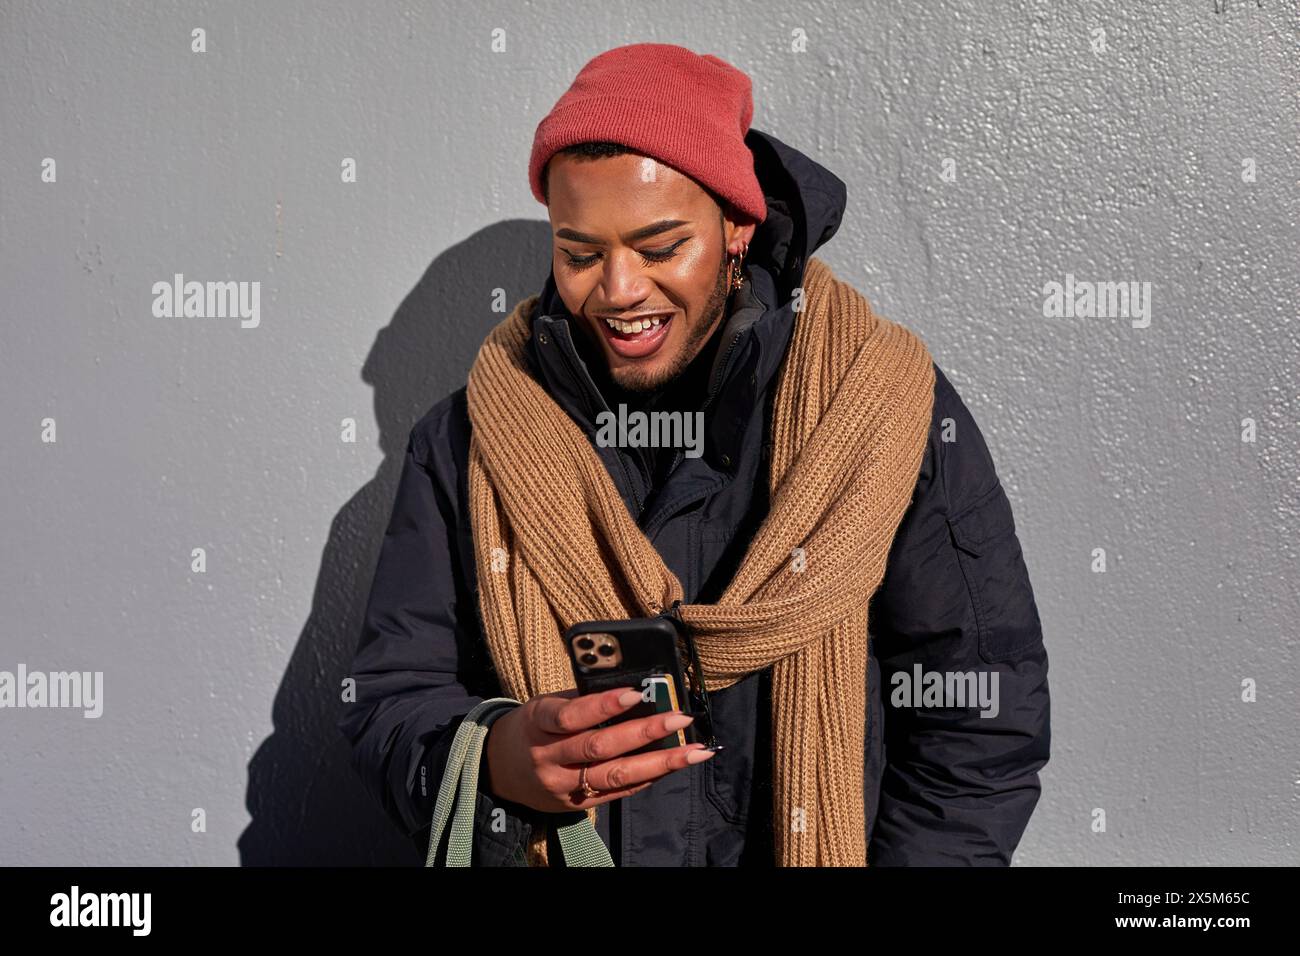 USA, New York City, Smiling queer man in warm clothing looking at smart phone Stock Photo